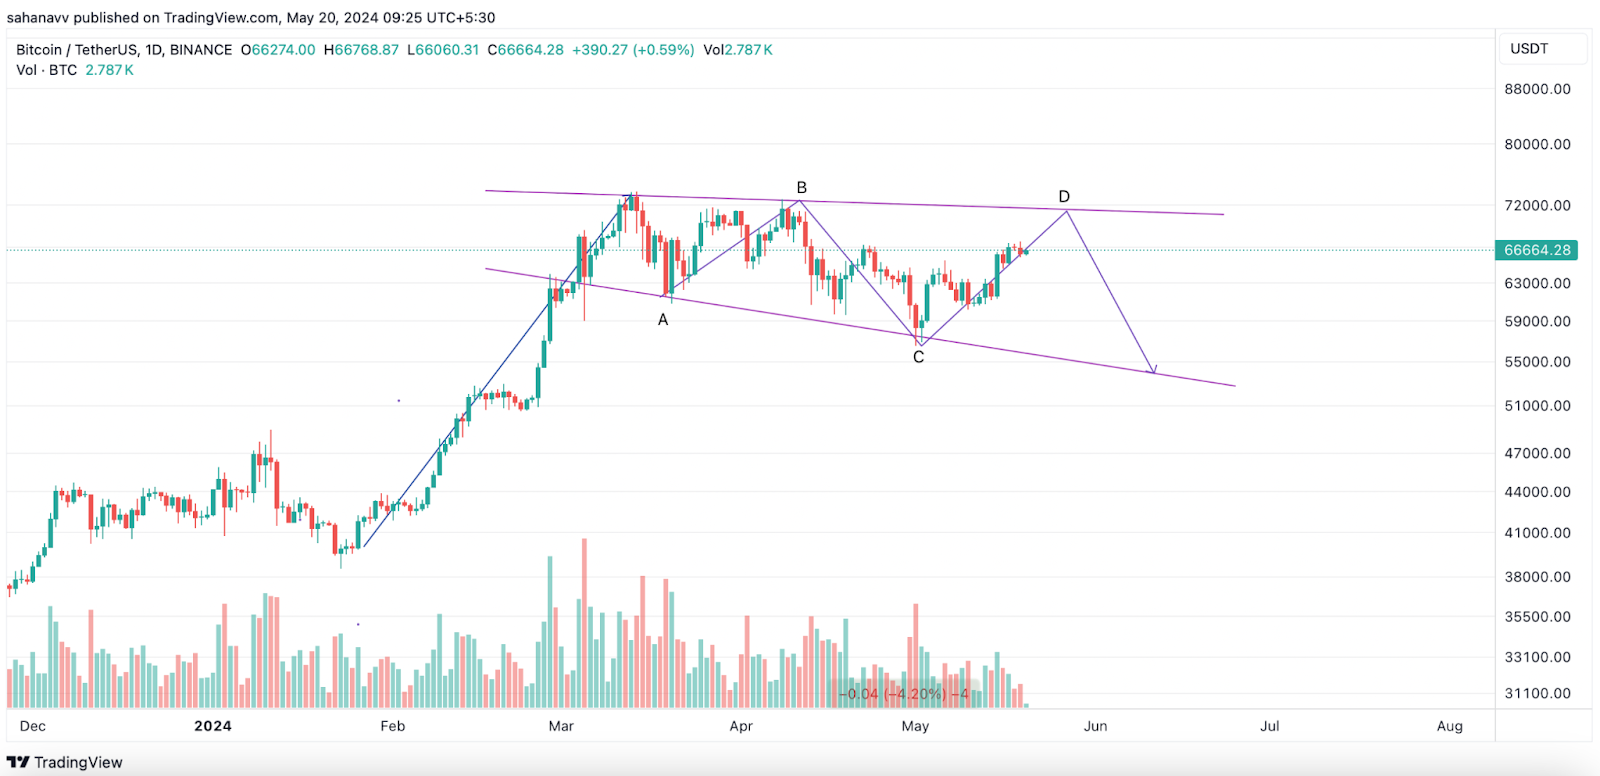 Bitcoin Breaking the Resistance: Where Will It Reach This Week? $71,000 or $73,000?